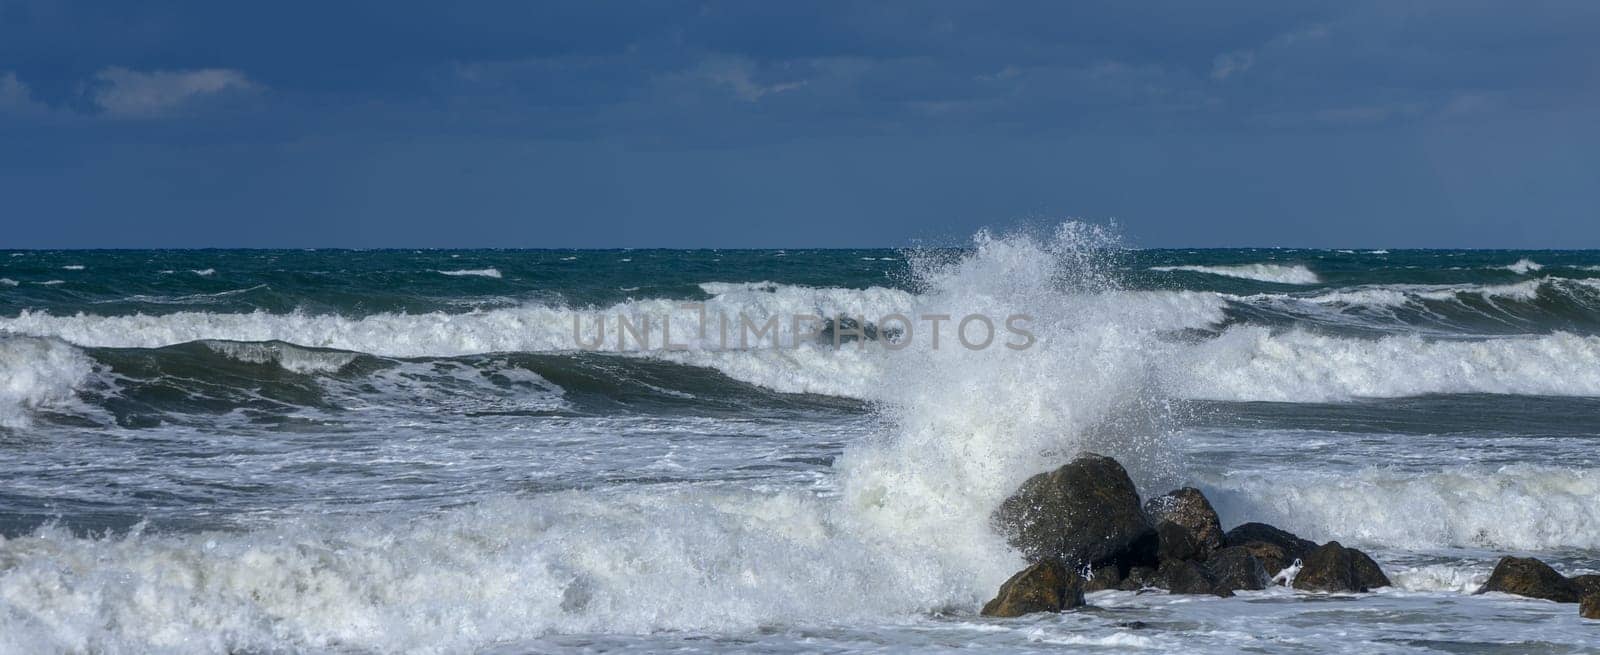 waves break on a stone in the Mediterranean Sea in autumn on the island of Cyprus 1 by Mixa74